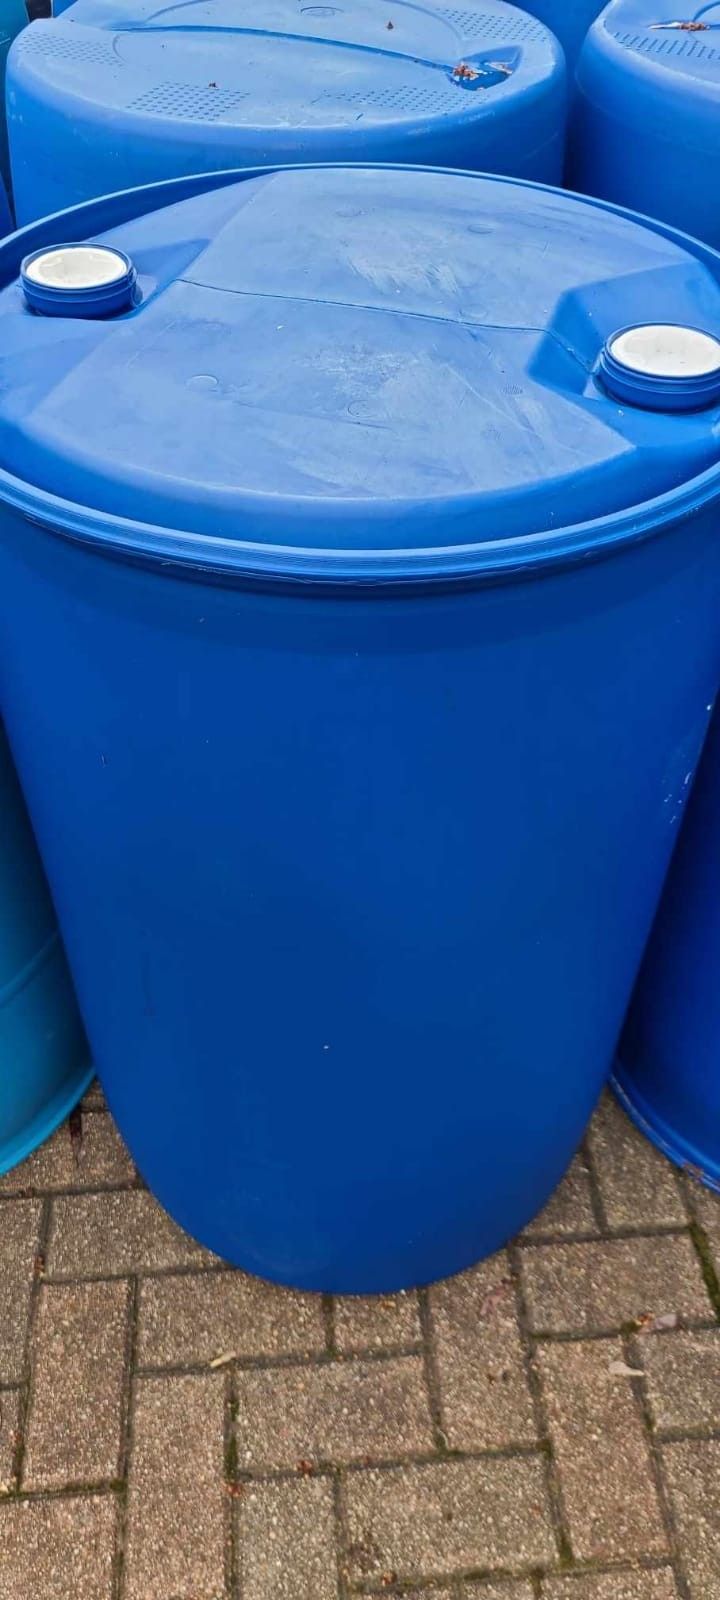 Rain Barrel barreles drums plastic like new and very clean perfect for rain water for yout garden water collection this are in super clean condition 1